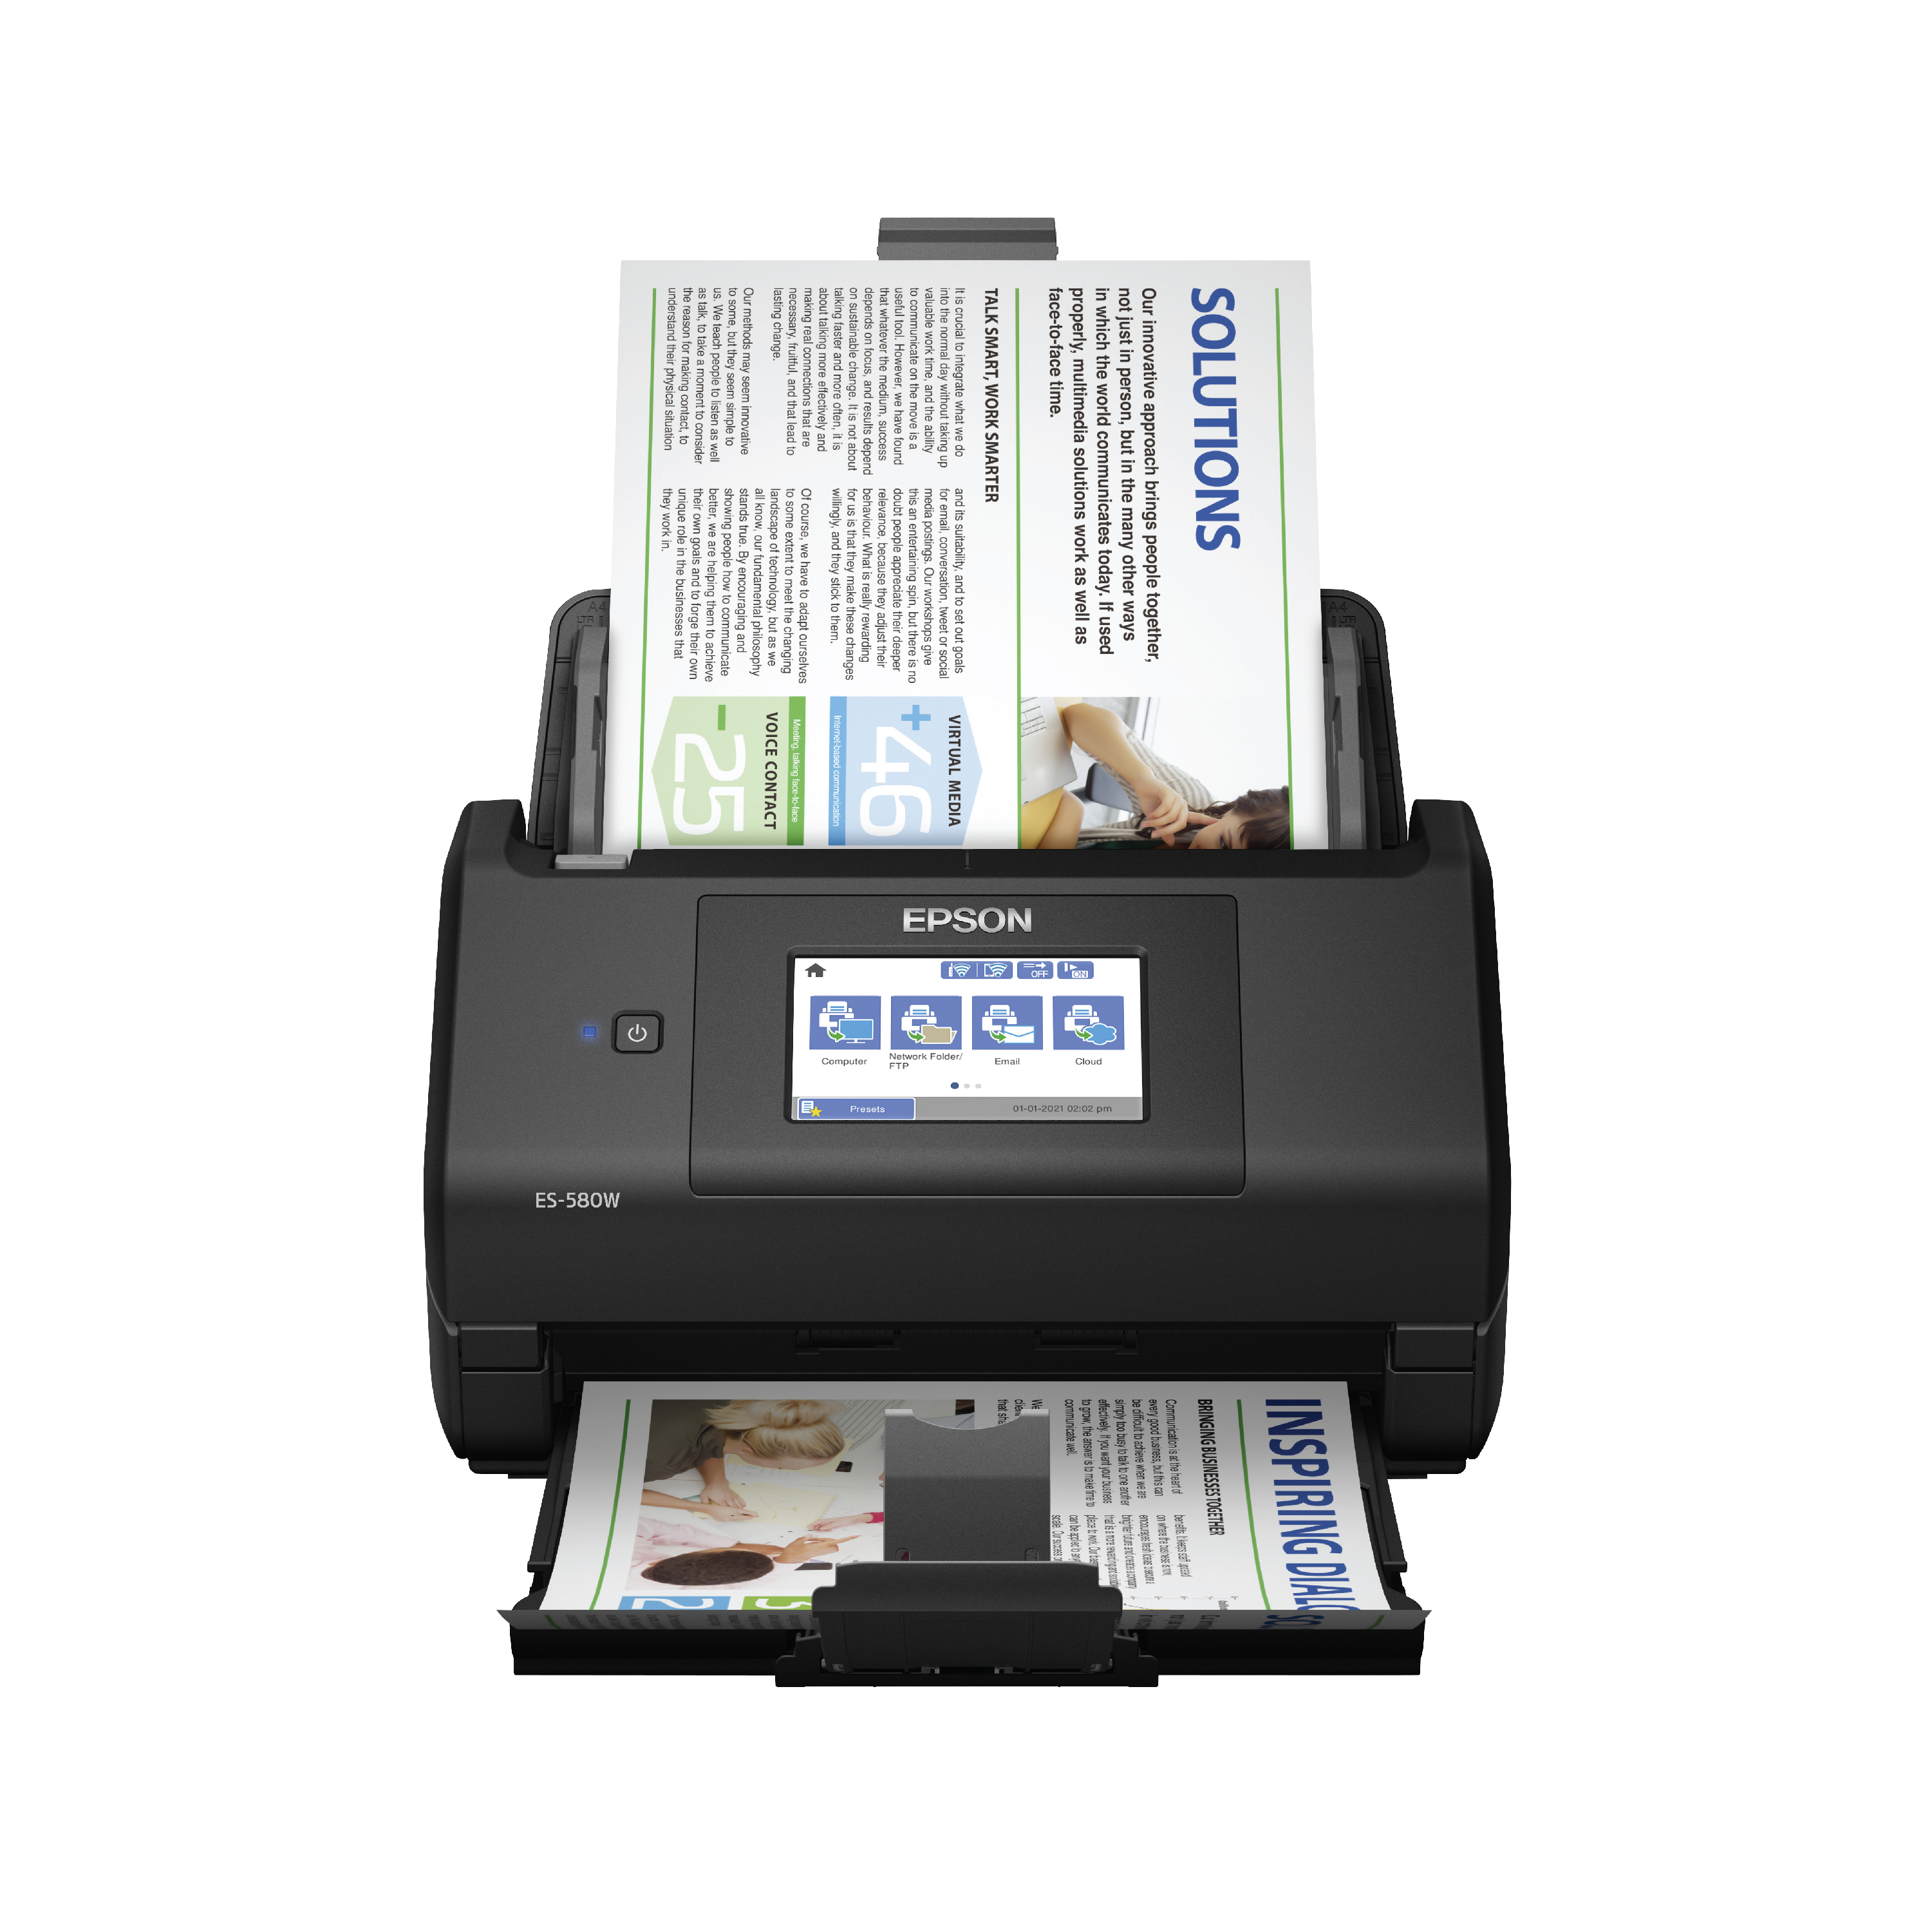 Epson WorkForce ES-580W Wireless Color Duplex Desktop Document Scanner for PC and Mac with 100-sheet Auto Document Feeder (ADF) and Intuitive 4.3" Touchscreen - image 1 of 8